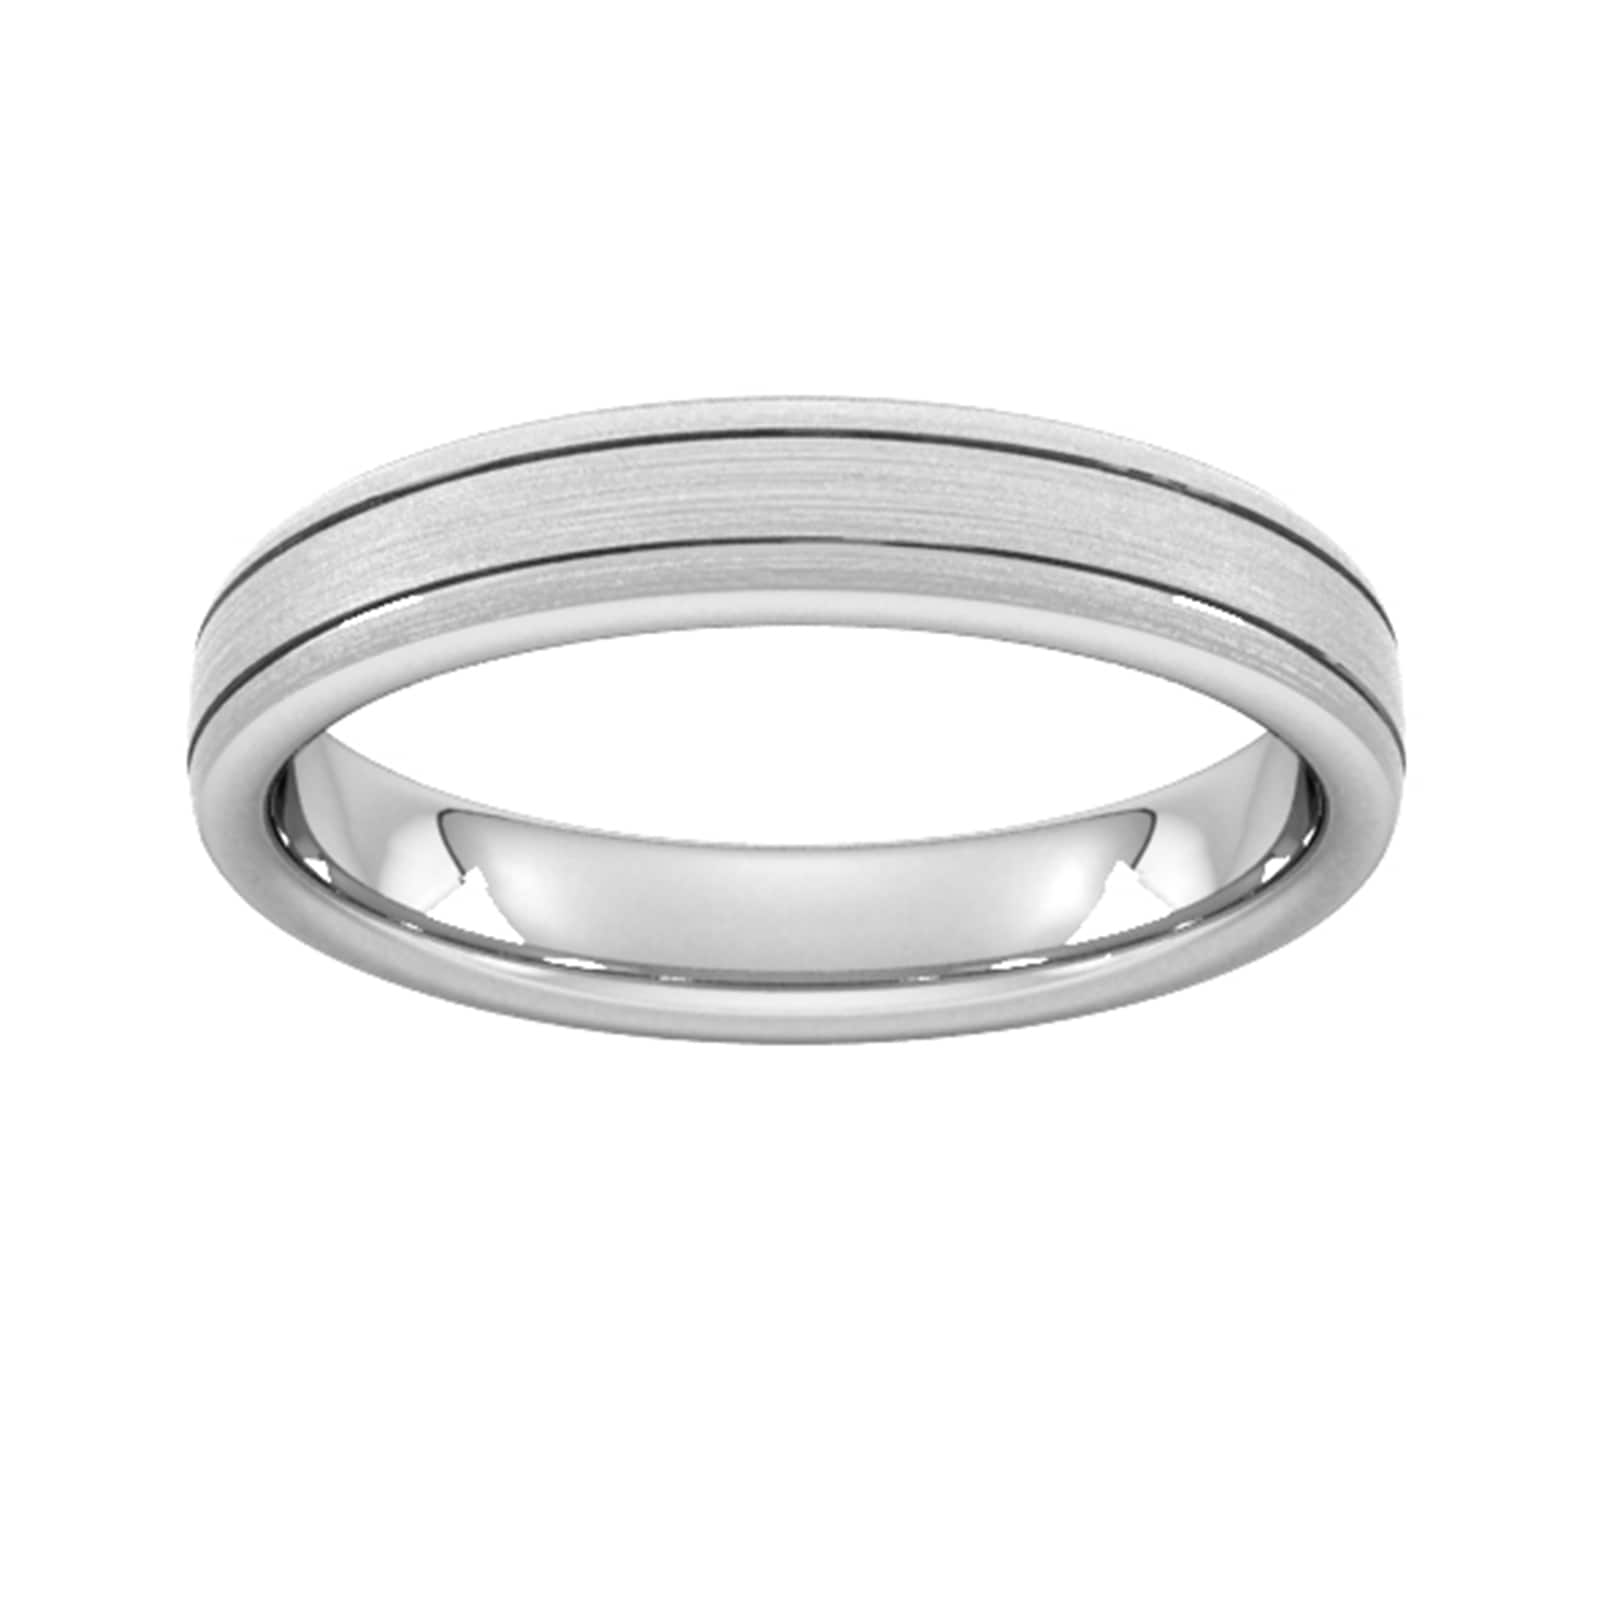 4mm Slight Court Extra Heavy Matt Finish With Double Grooves Wedding Ring In 950 Palladium - Ring Size P